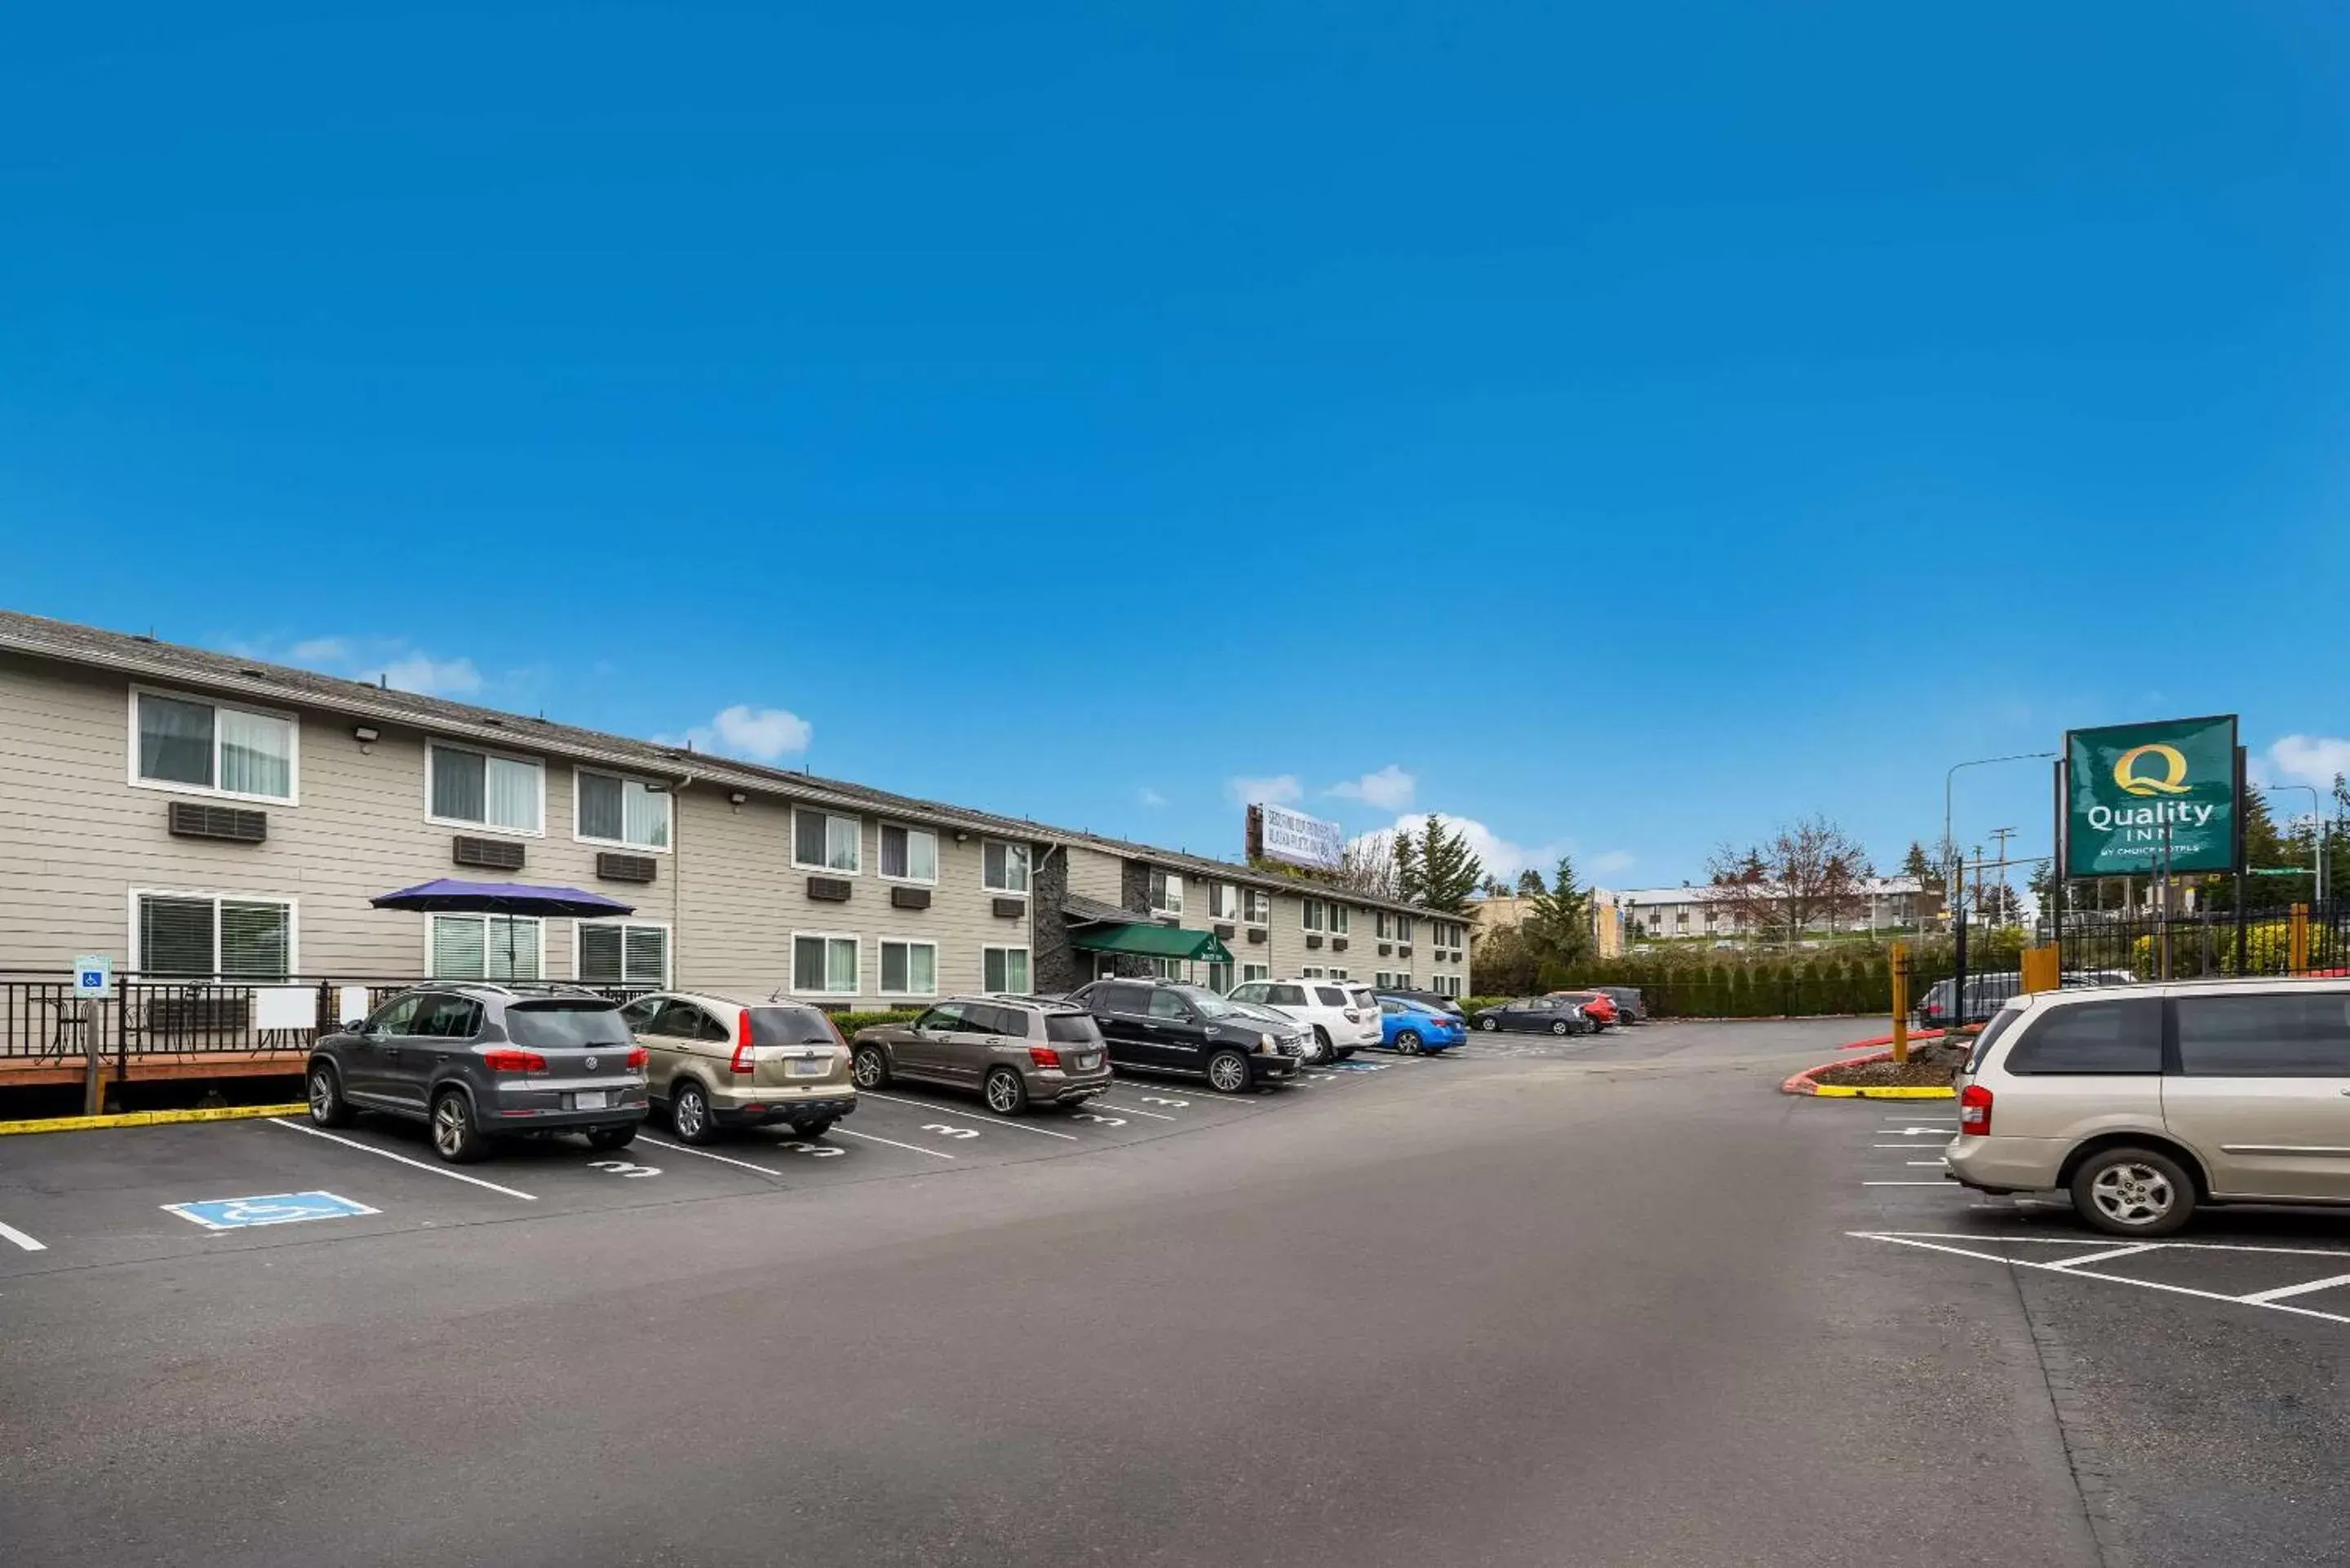 Property building in Quality Inn SeaTac Airport-Seattle